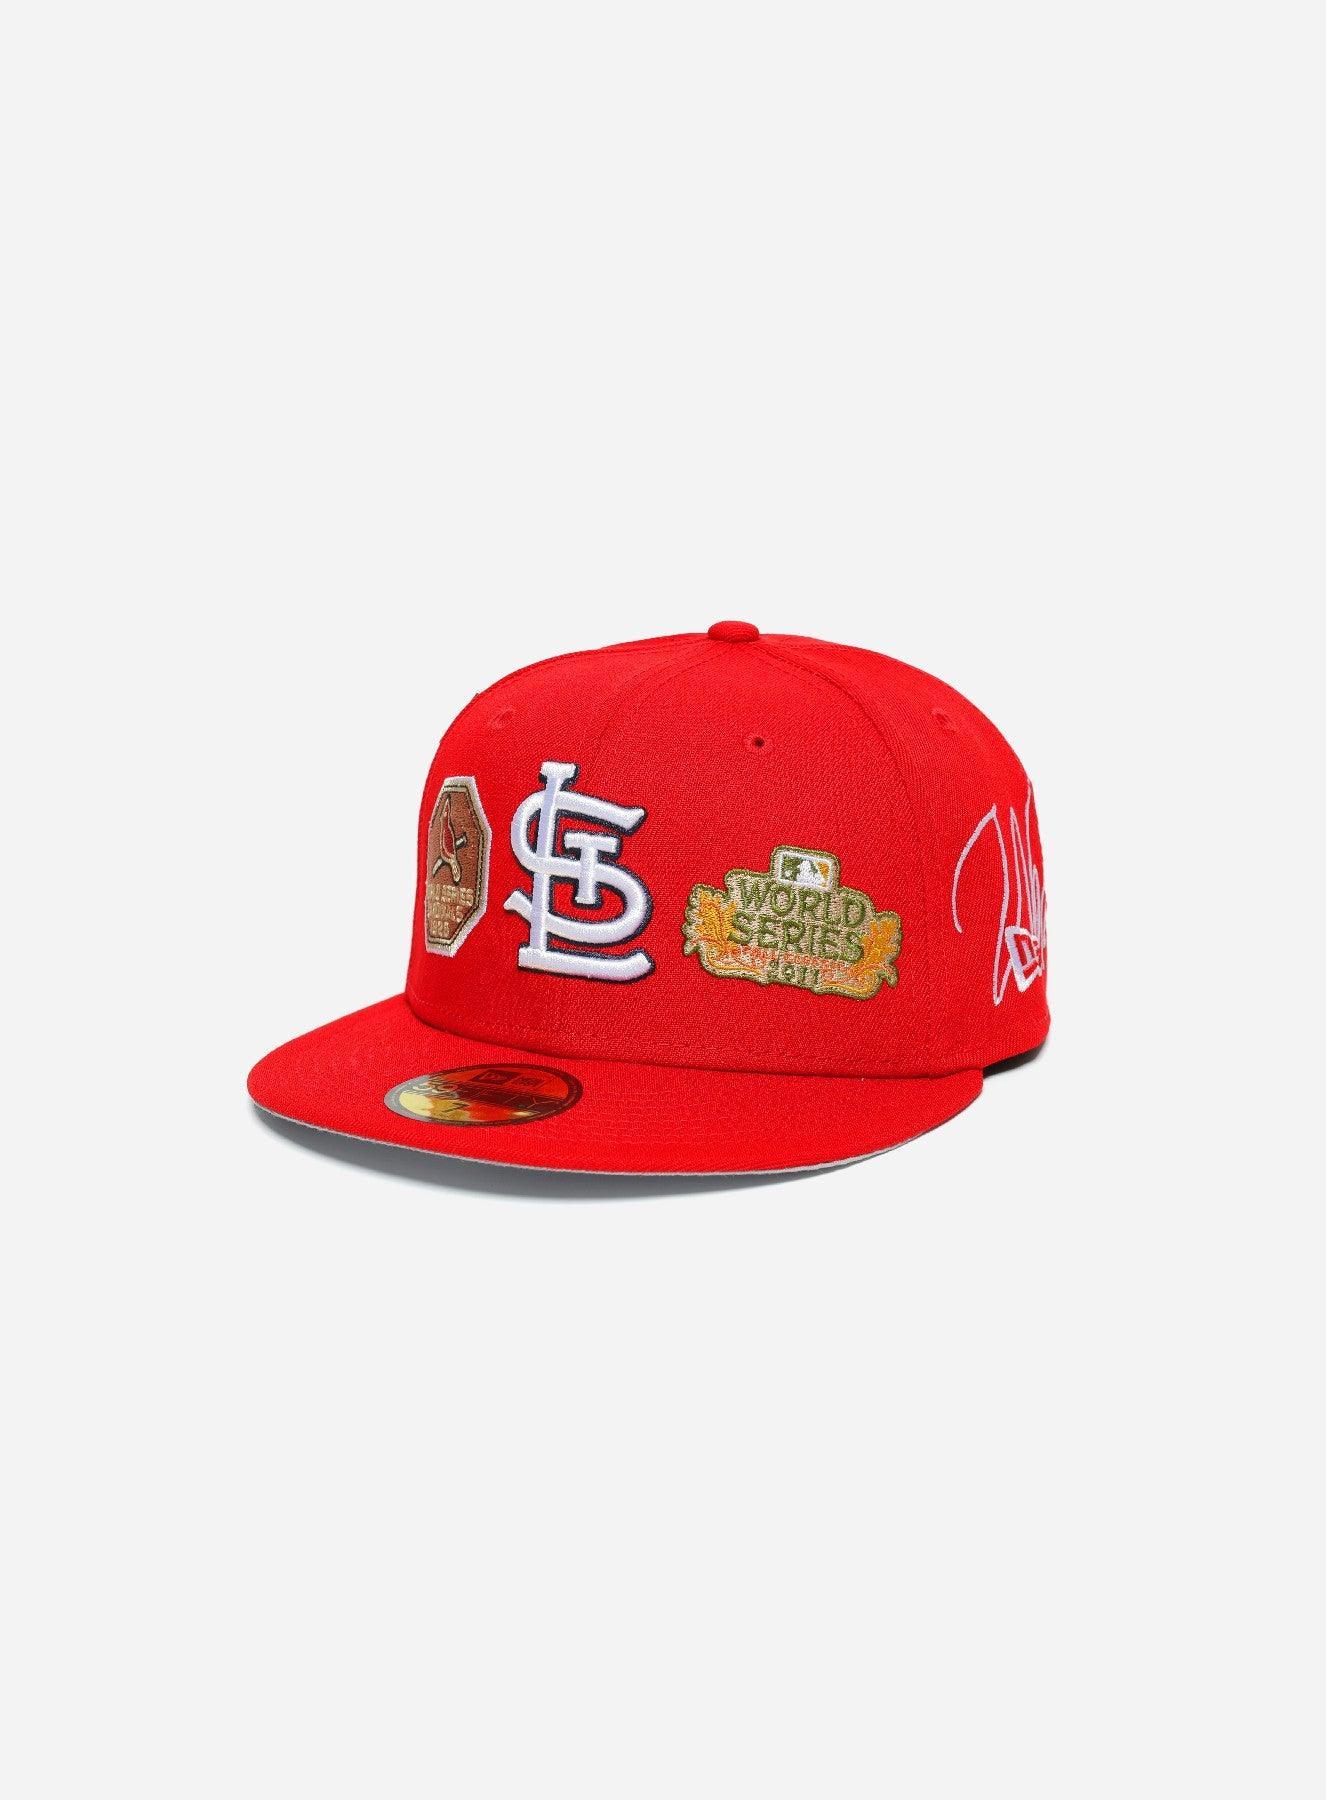 Buy St Louis Cardinals Hat Online In India -  India